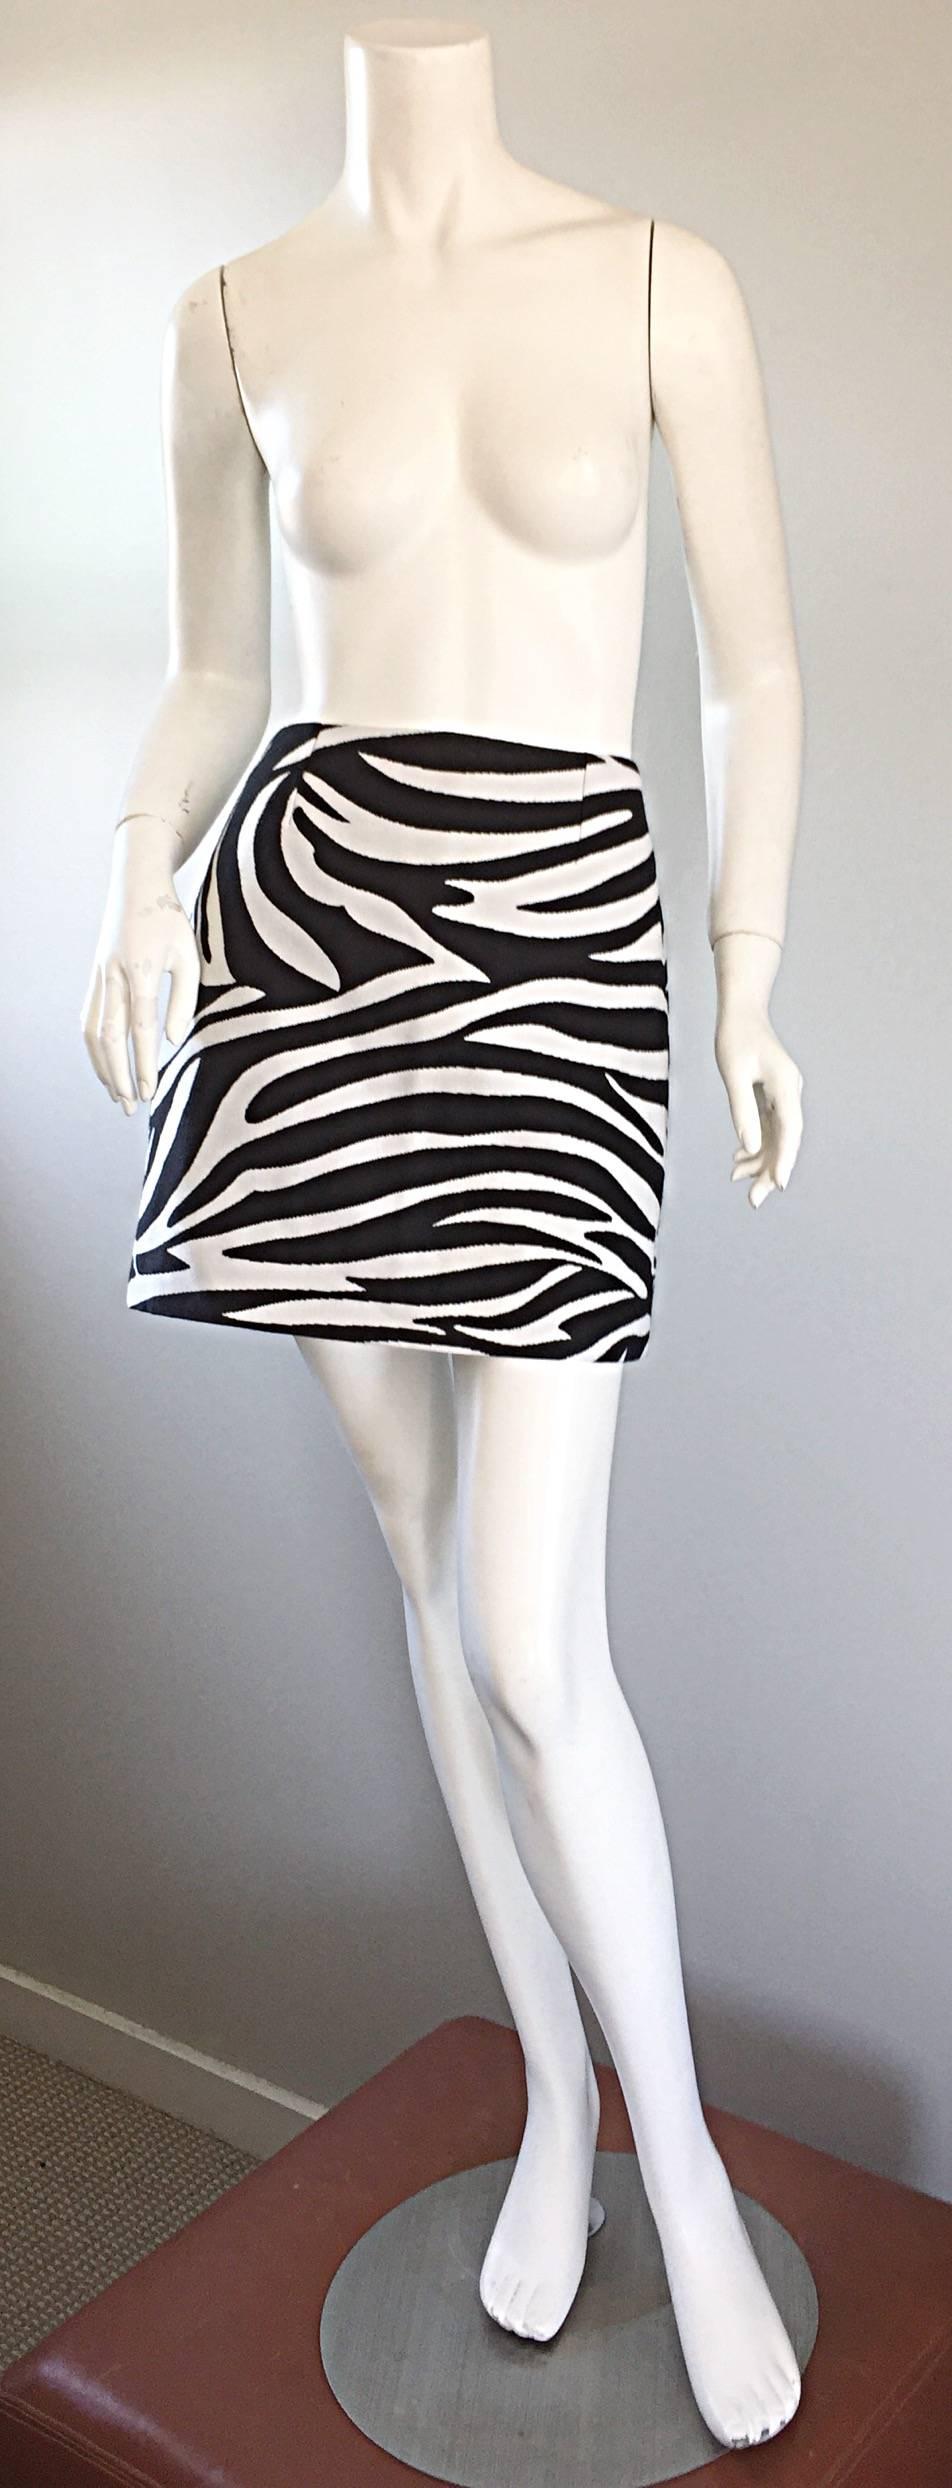 Stellar brand new CELINE, by PHOEBE PHILO, black and white zebra mini skirt! Perfect A-line fit, with amazing shape. Philo is credited with bringing Celine out from their 'rut,' transforming the fashion house back into a sought after brand. This